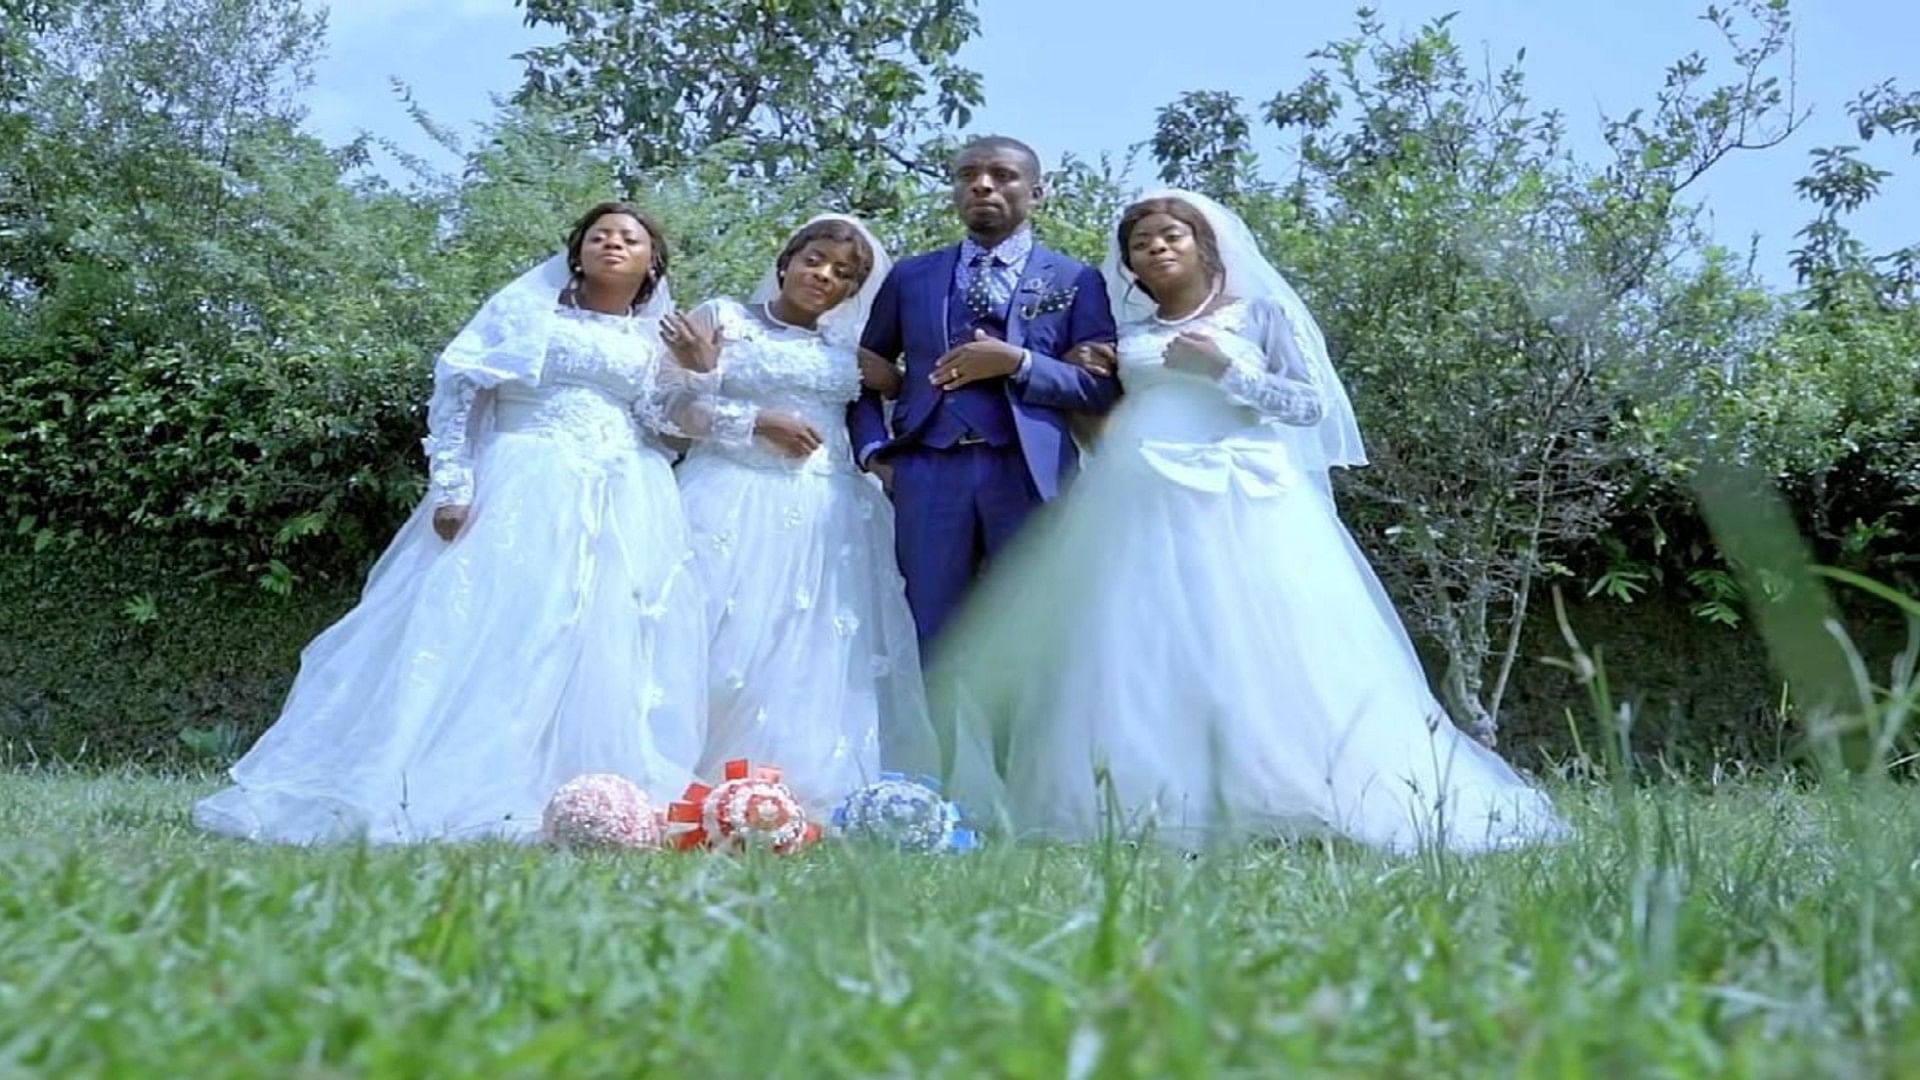 Man married triplets sisters in one day three wives proposed to him